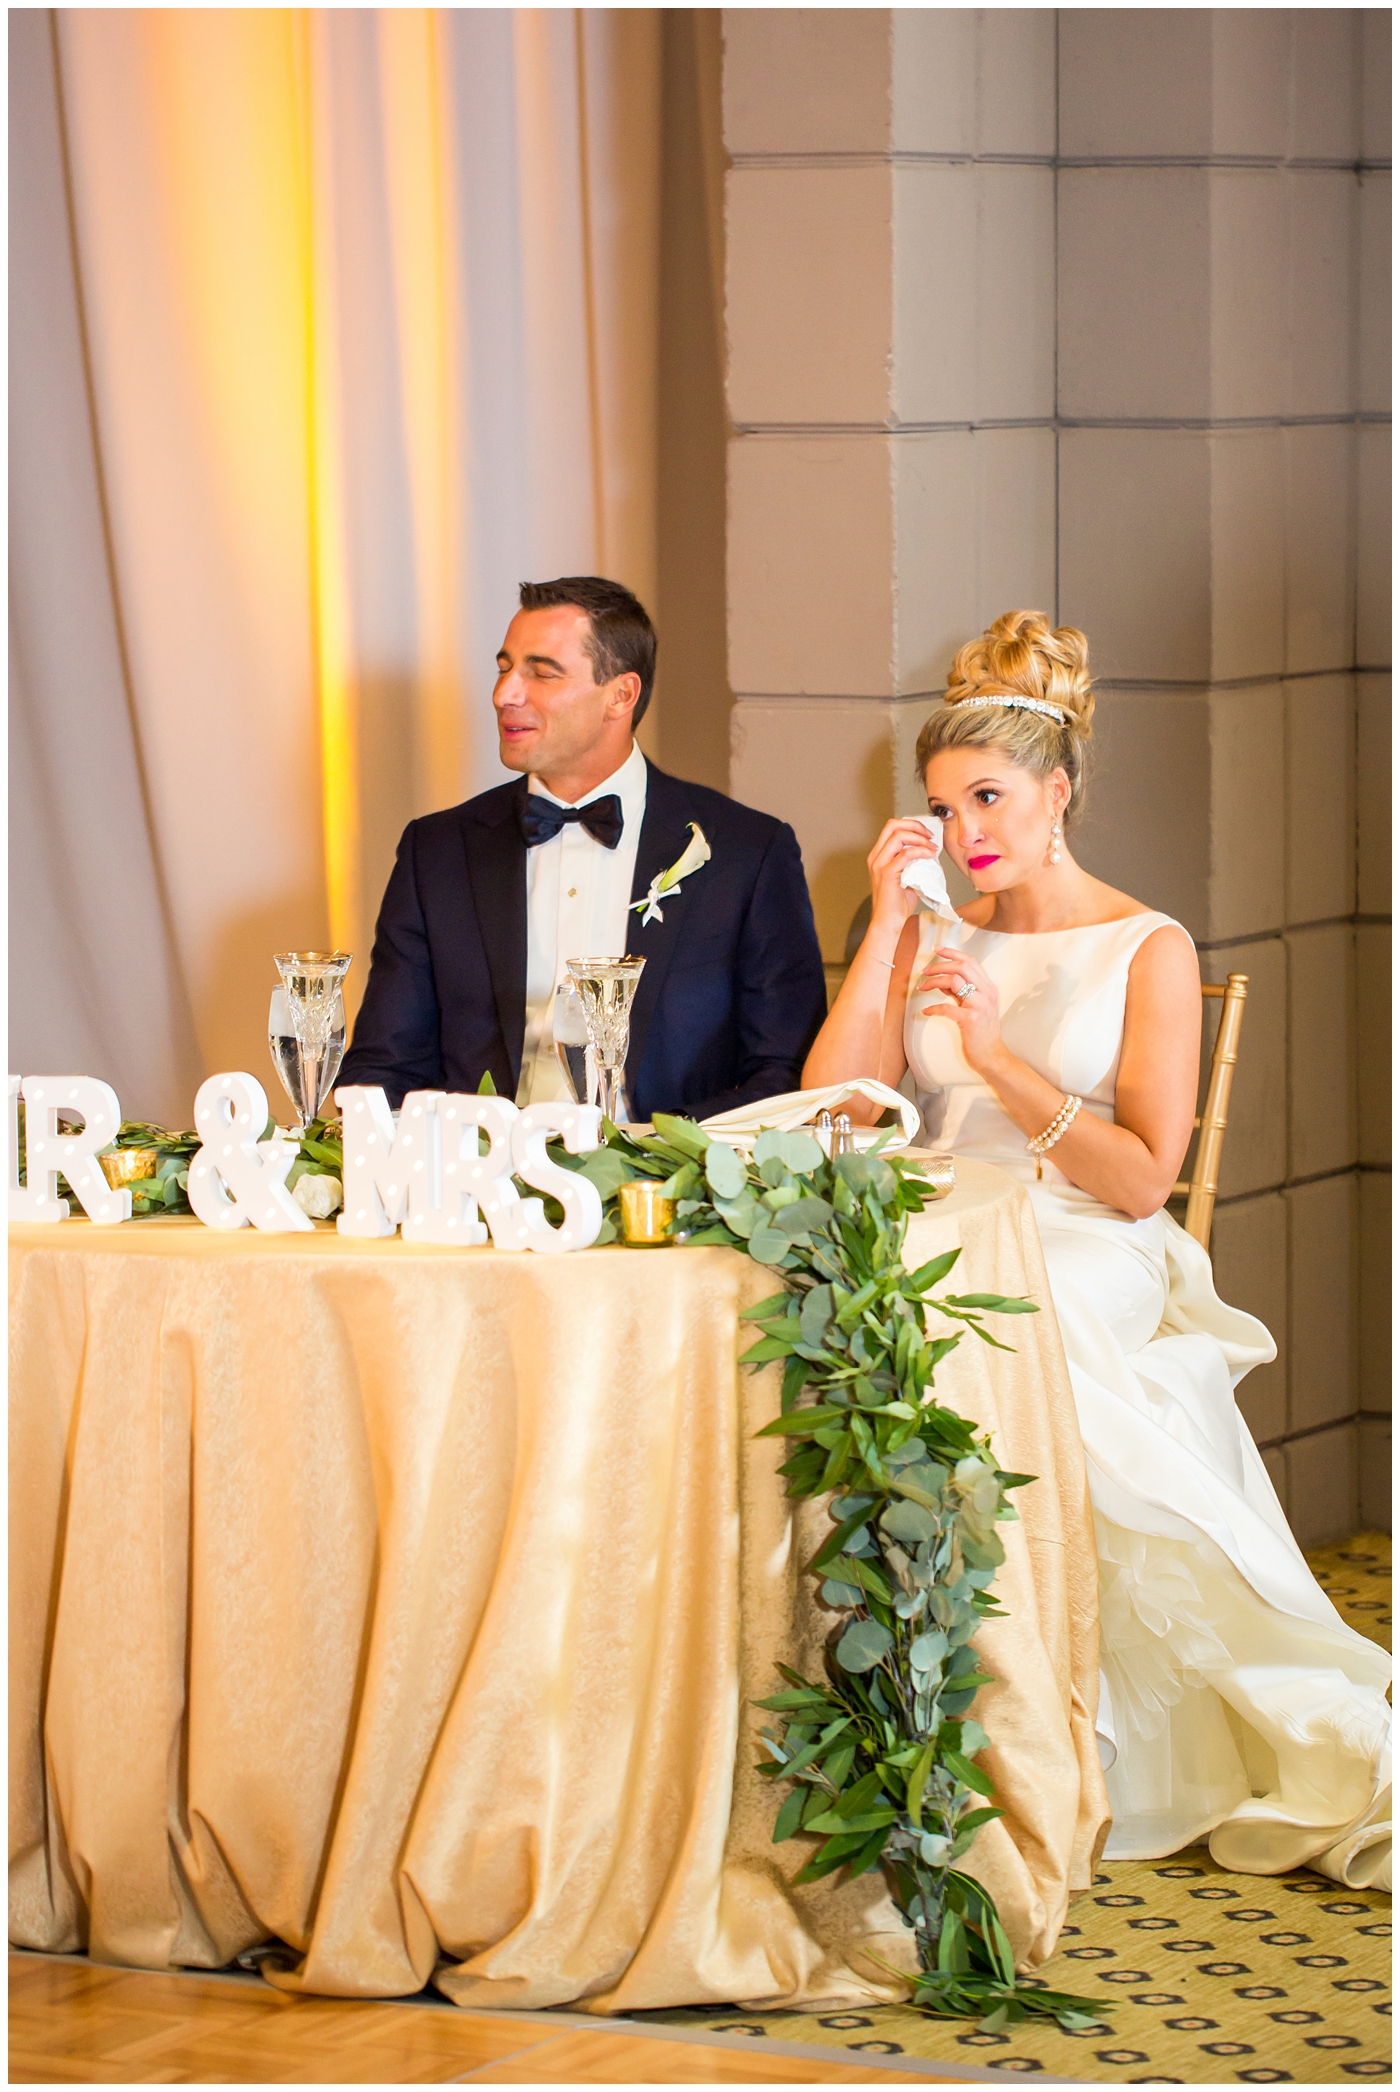 Bride in sareh nouri wedding dress with bow on the back and pink lip stick with all white flower bouquet with groom in navy neiman marcus and canali suit with bowtie with calla lilly boutonniere wedding day ballroom reception during toasts